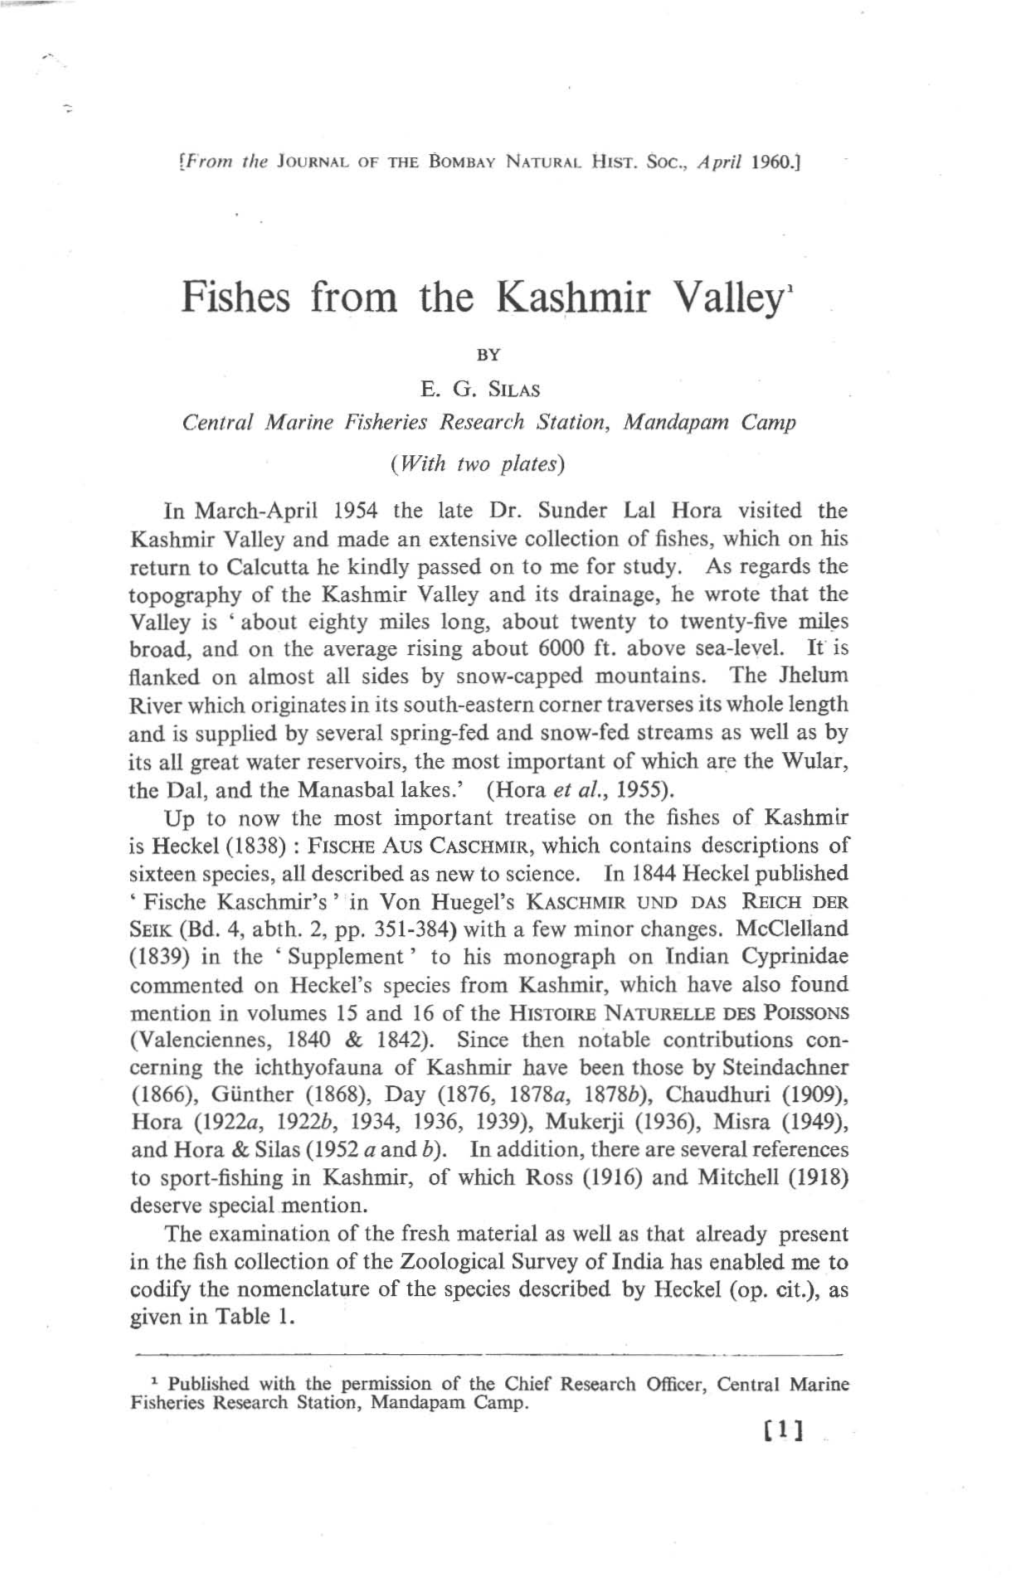 Fishes from the Kashmir Valley'